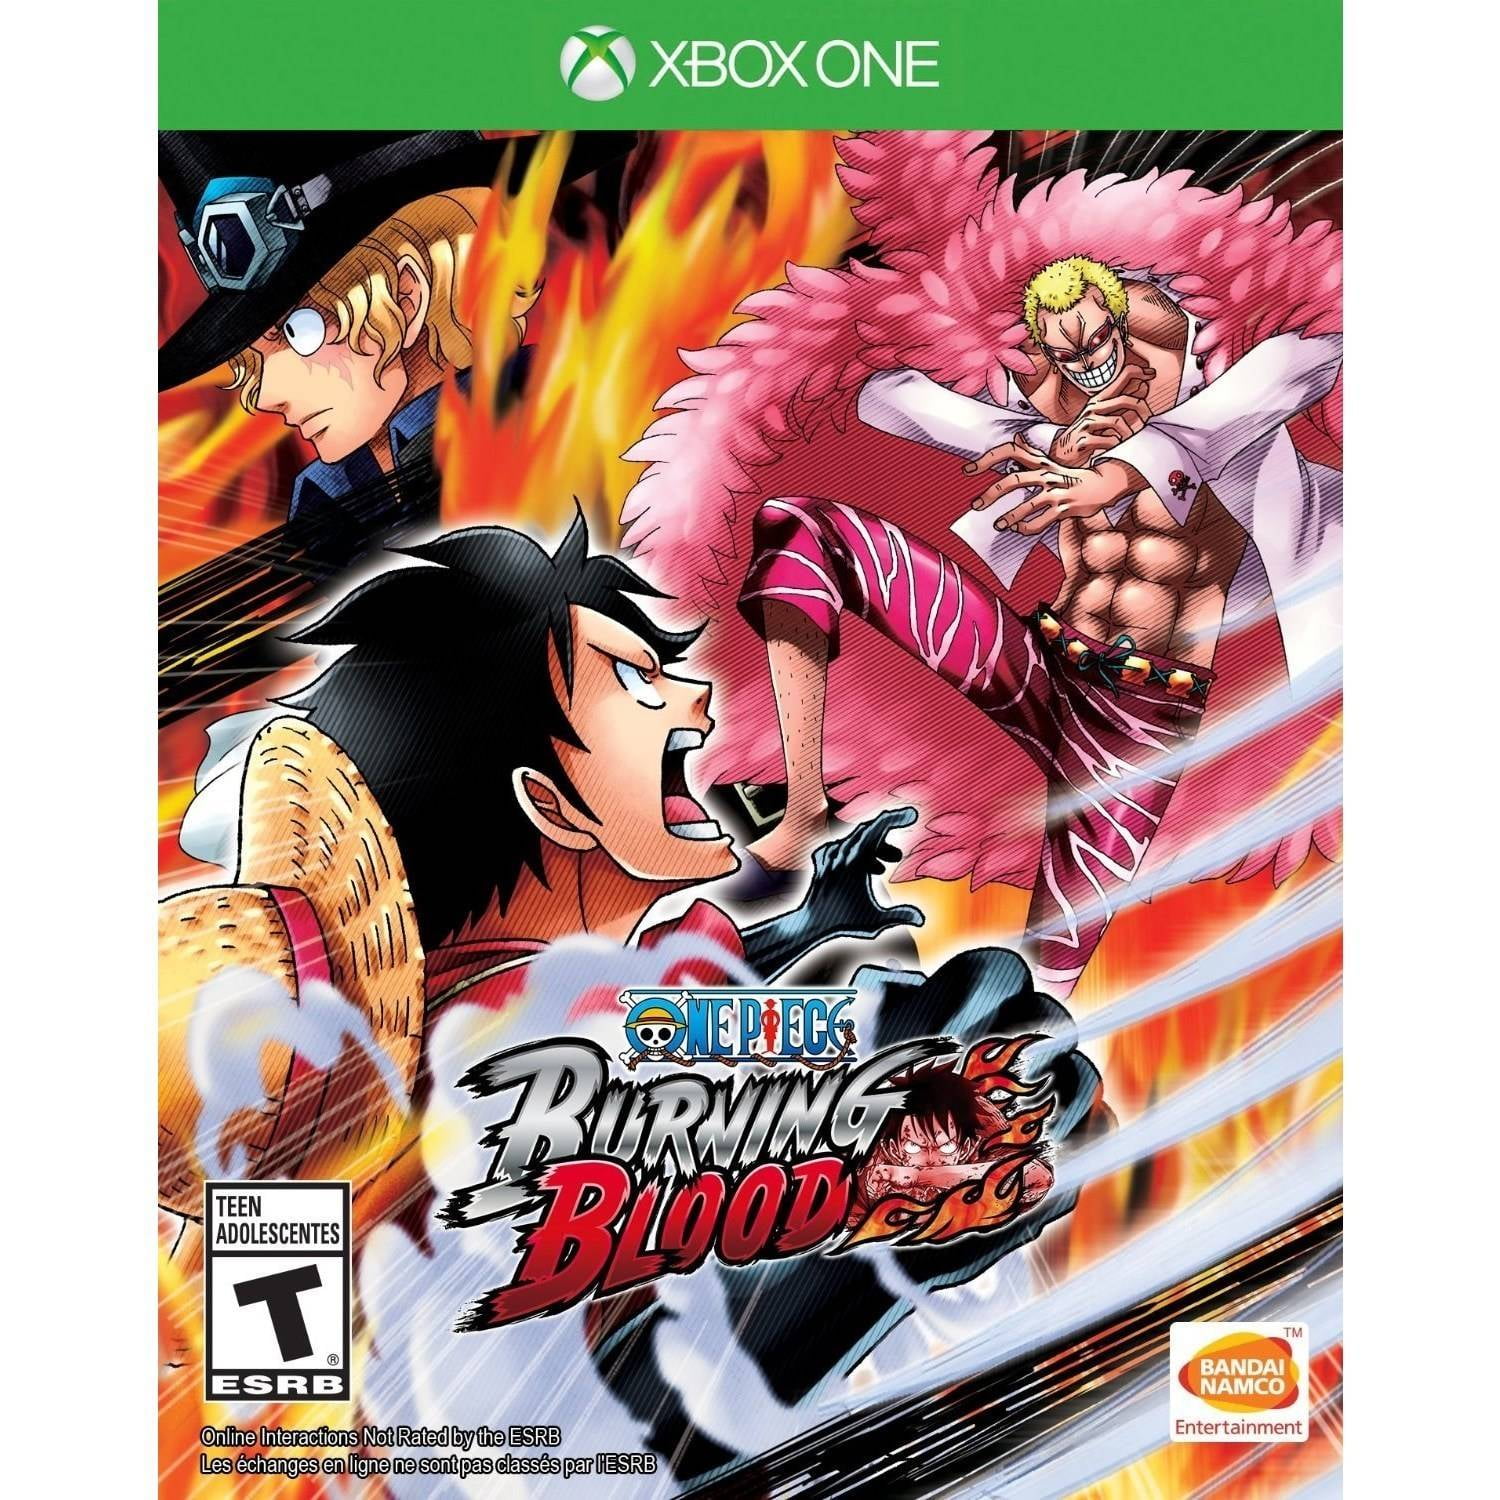 Anime Themed Xbox 360 Games